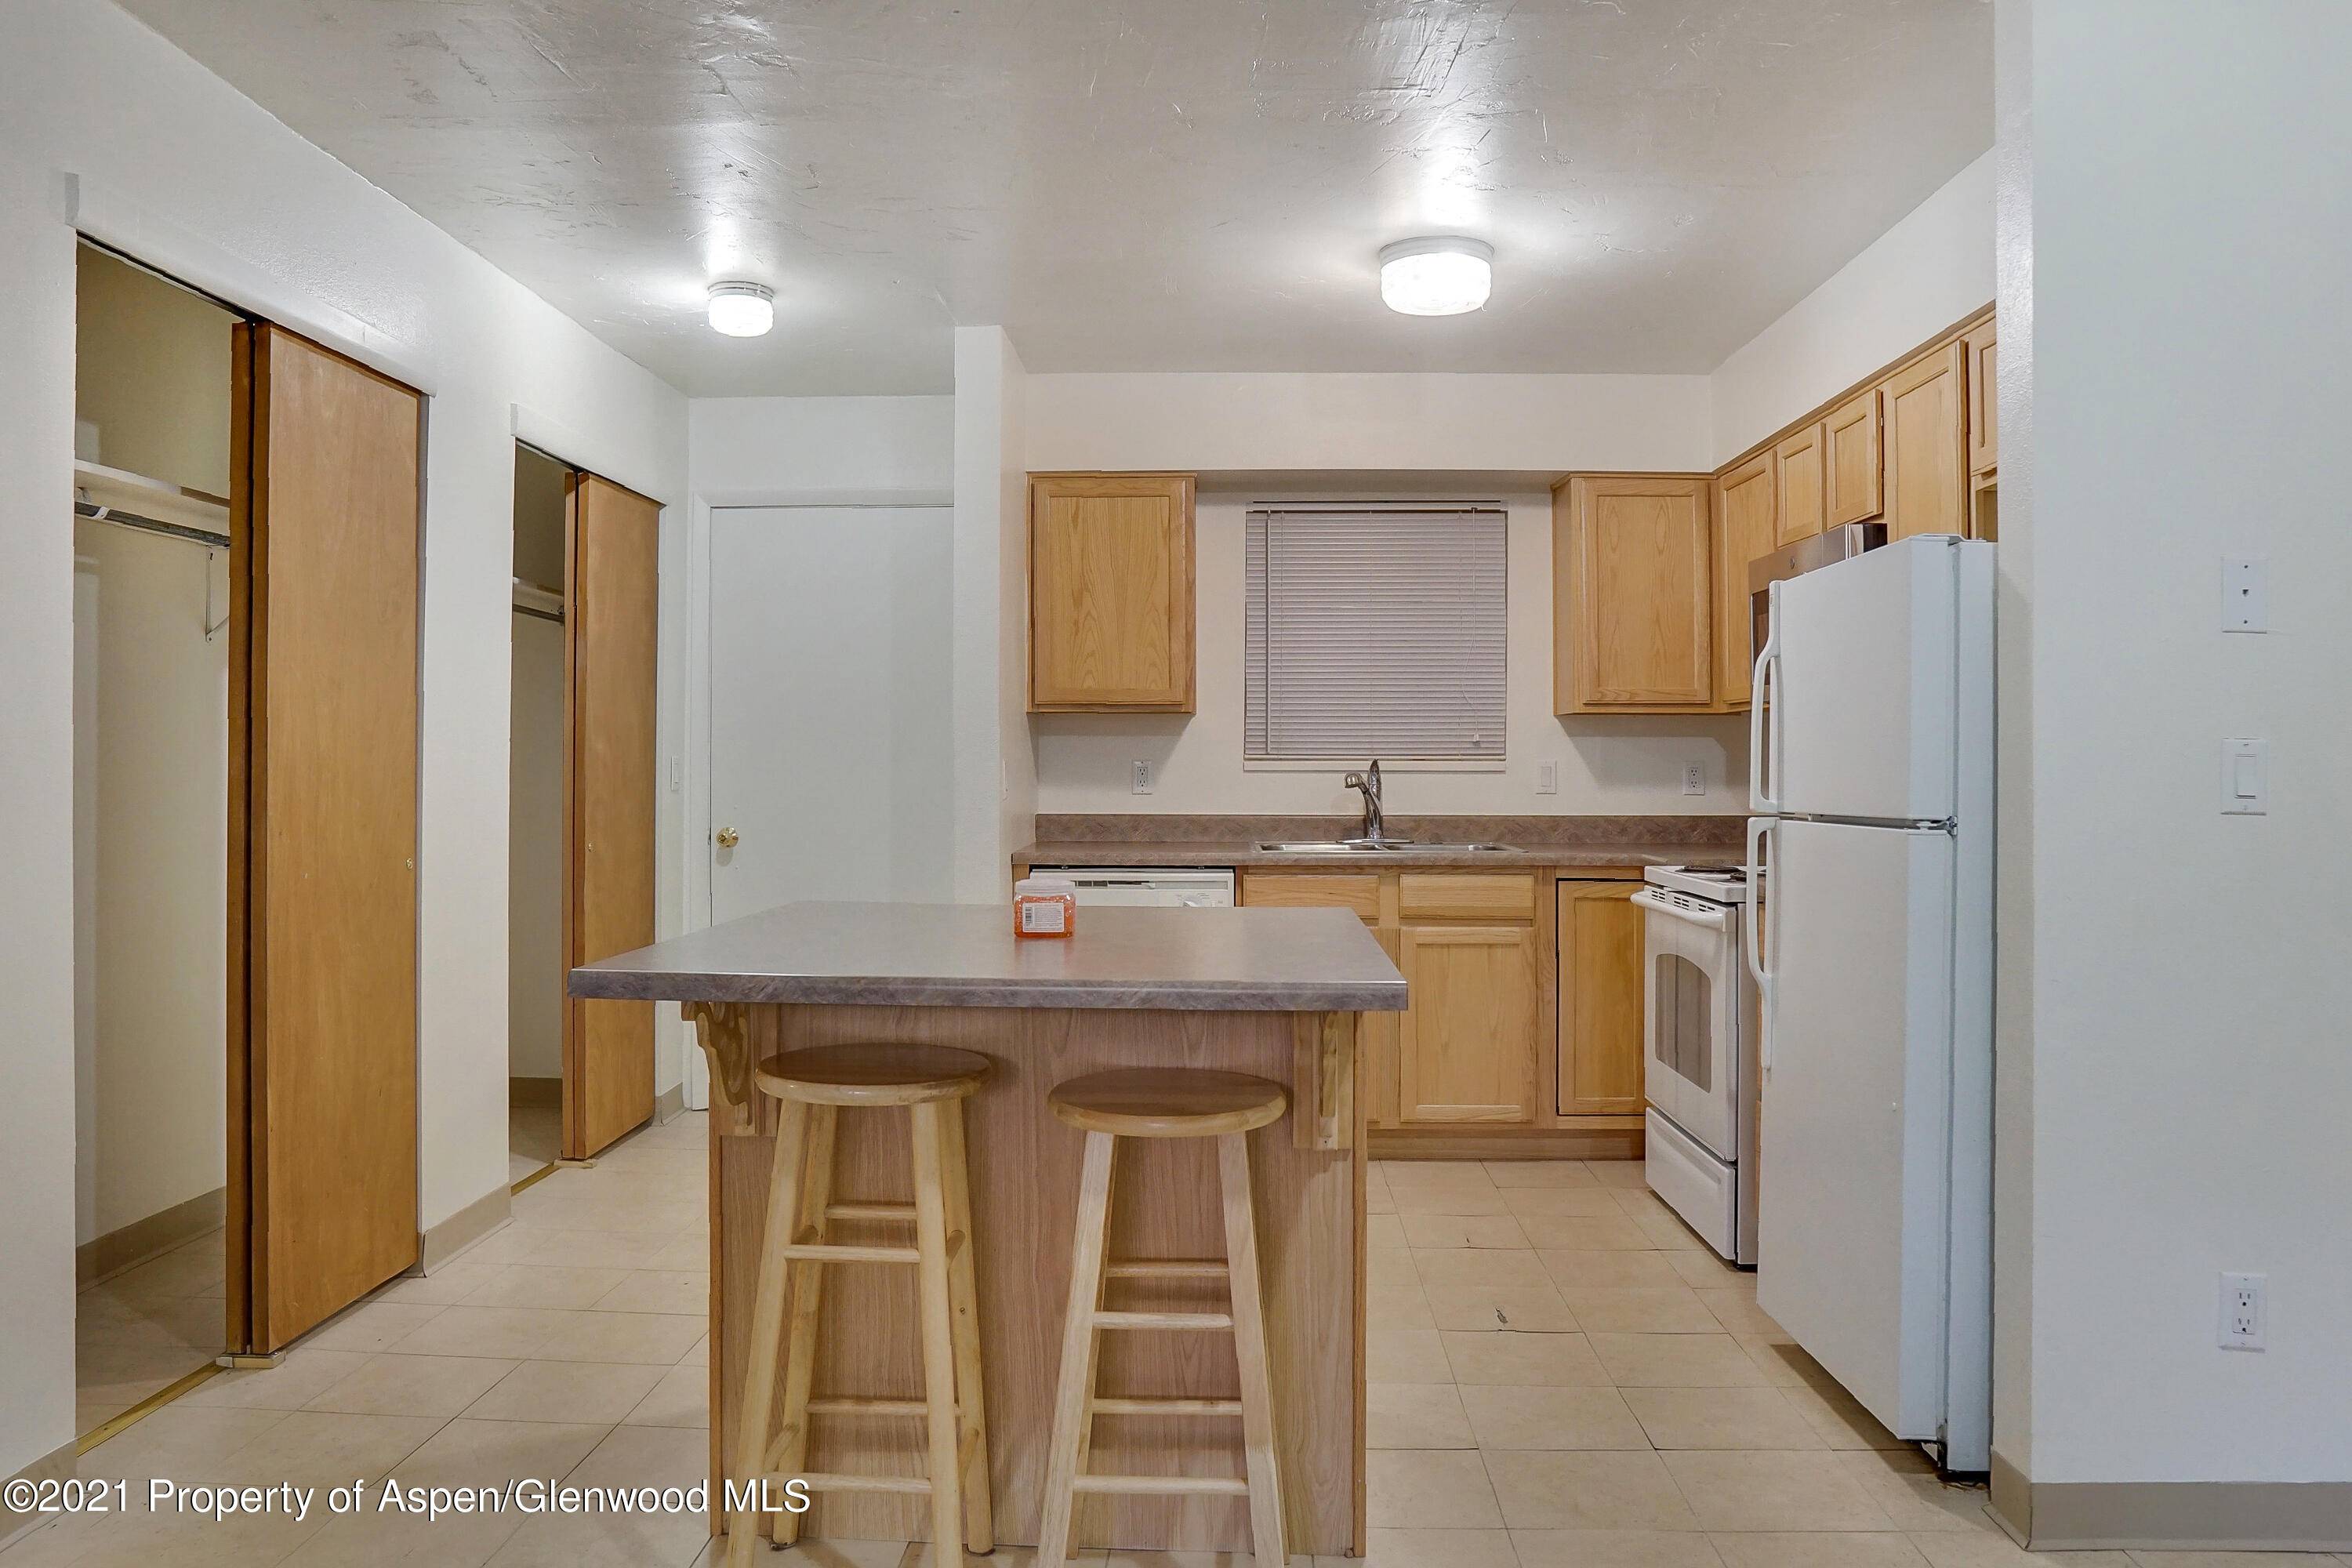 This 874 sq. ft. condo is located on the main floor and includes an eat in kitchen with an island and ample cabinets.